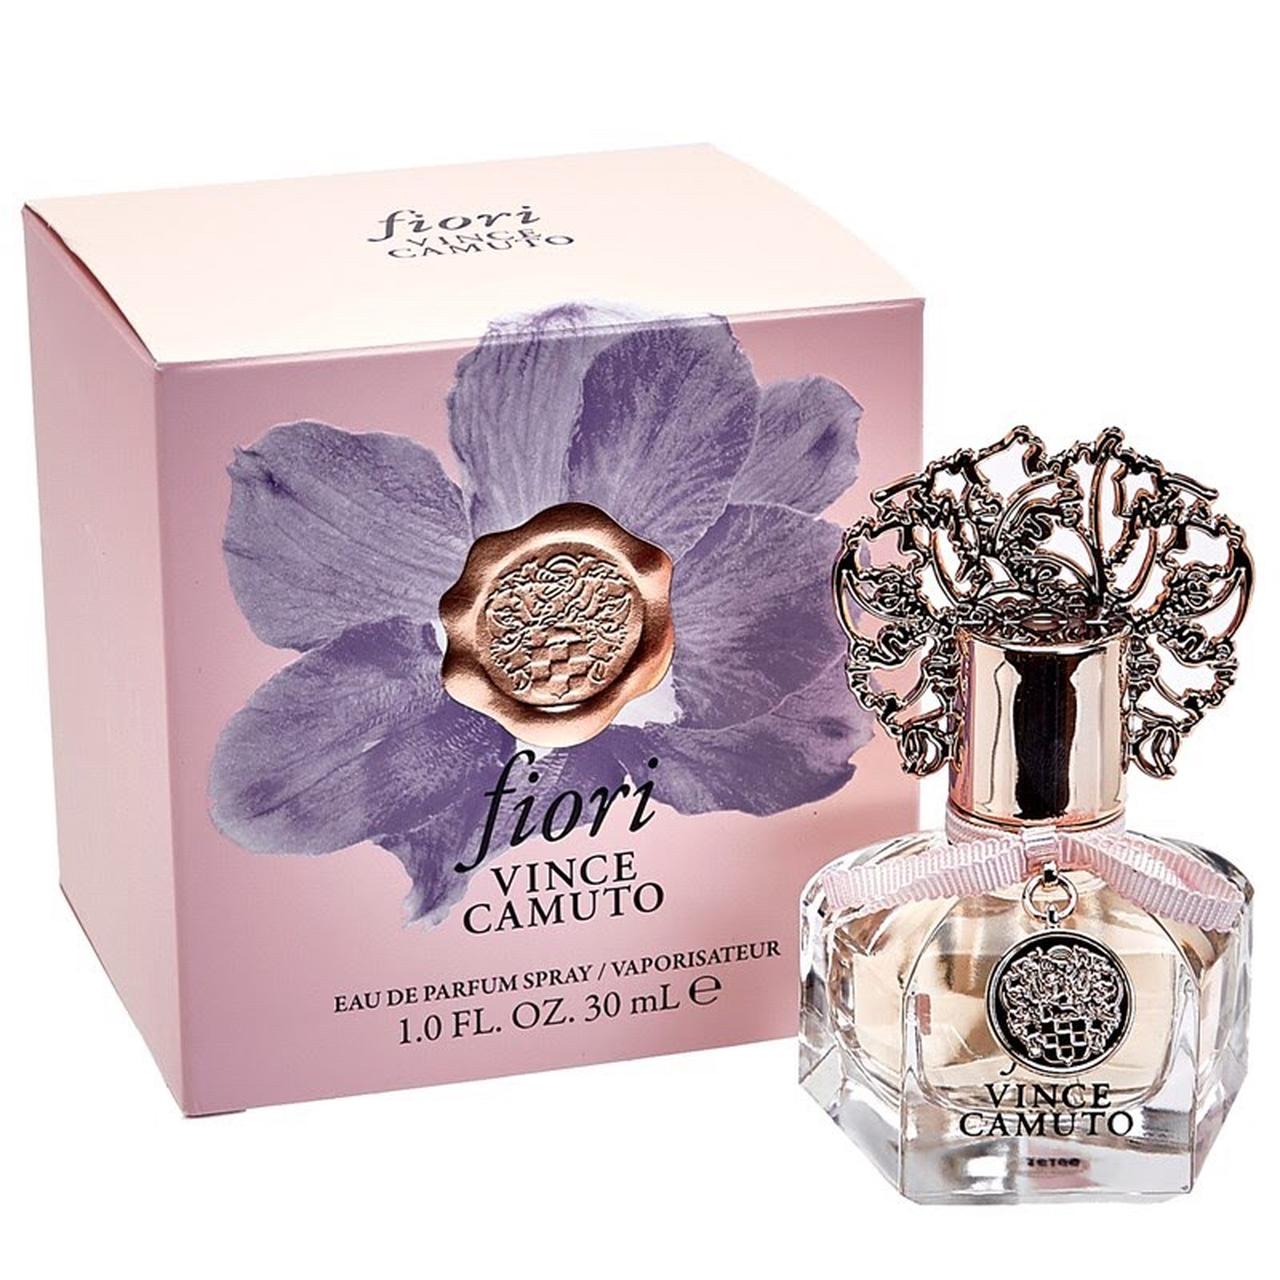 Other, Vince Camuto Fiori Edp